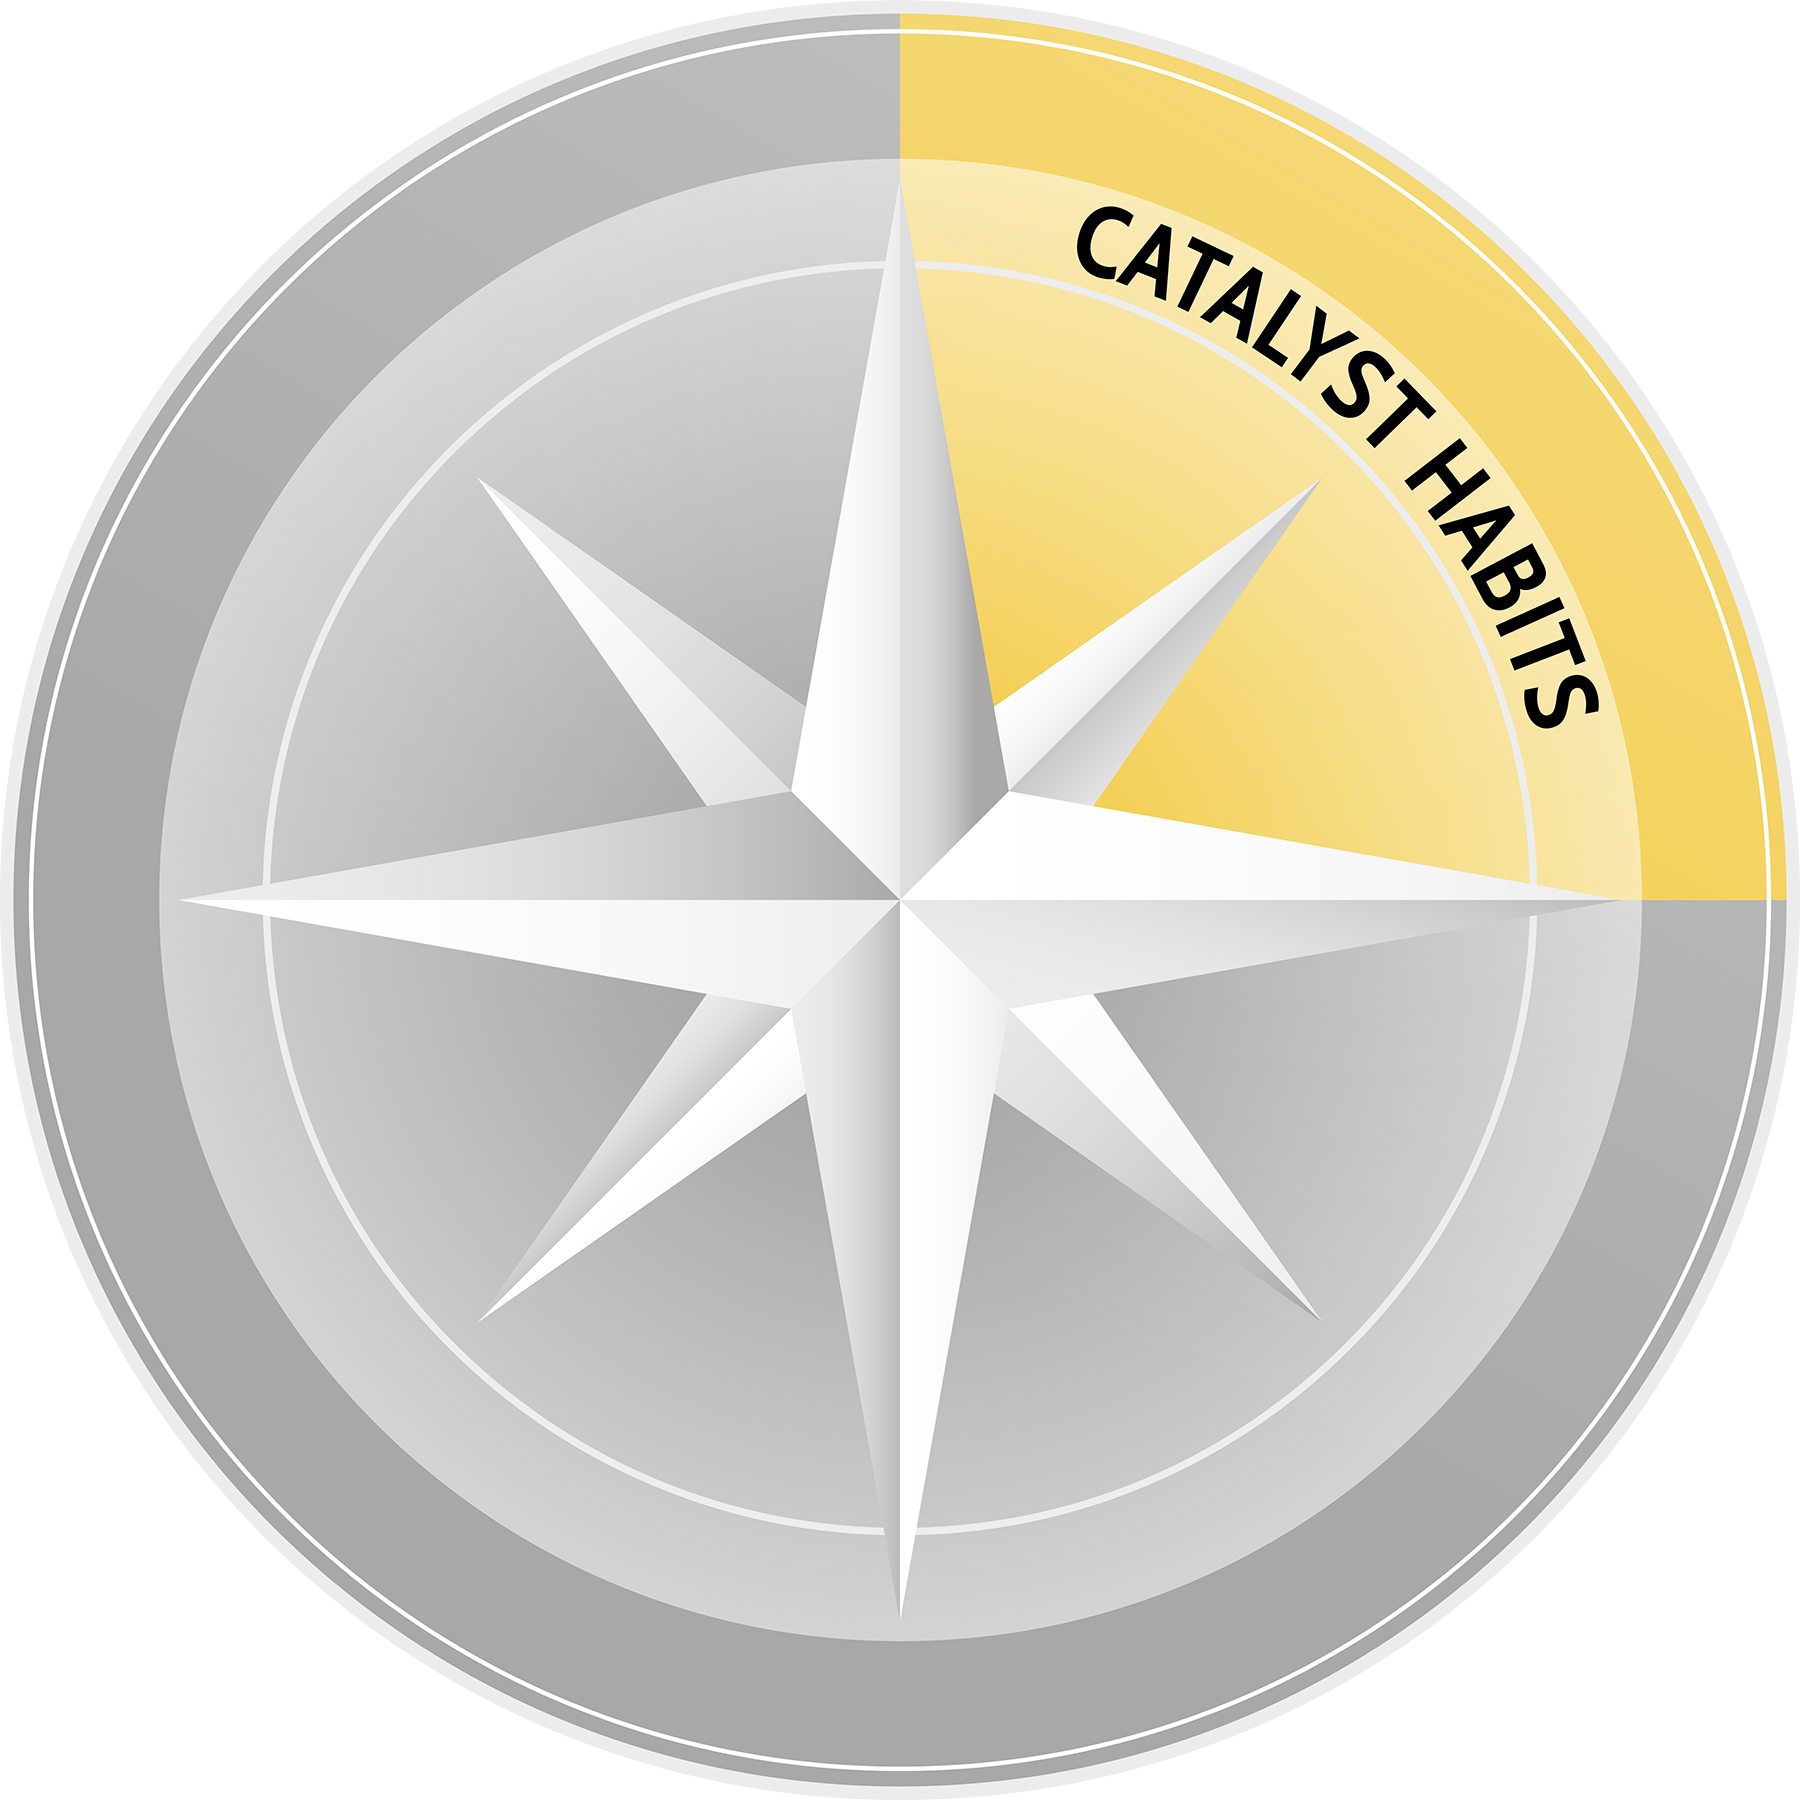 the top right quarter of the leadership journey compass in color with words catalyst habits and the rest of the compass in grey scale without words